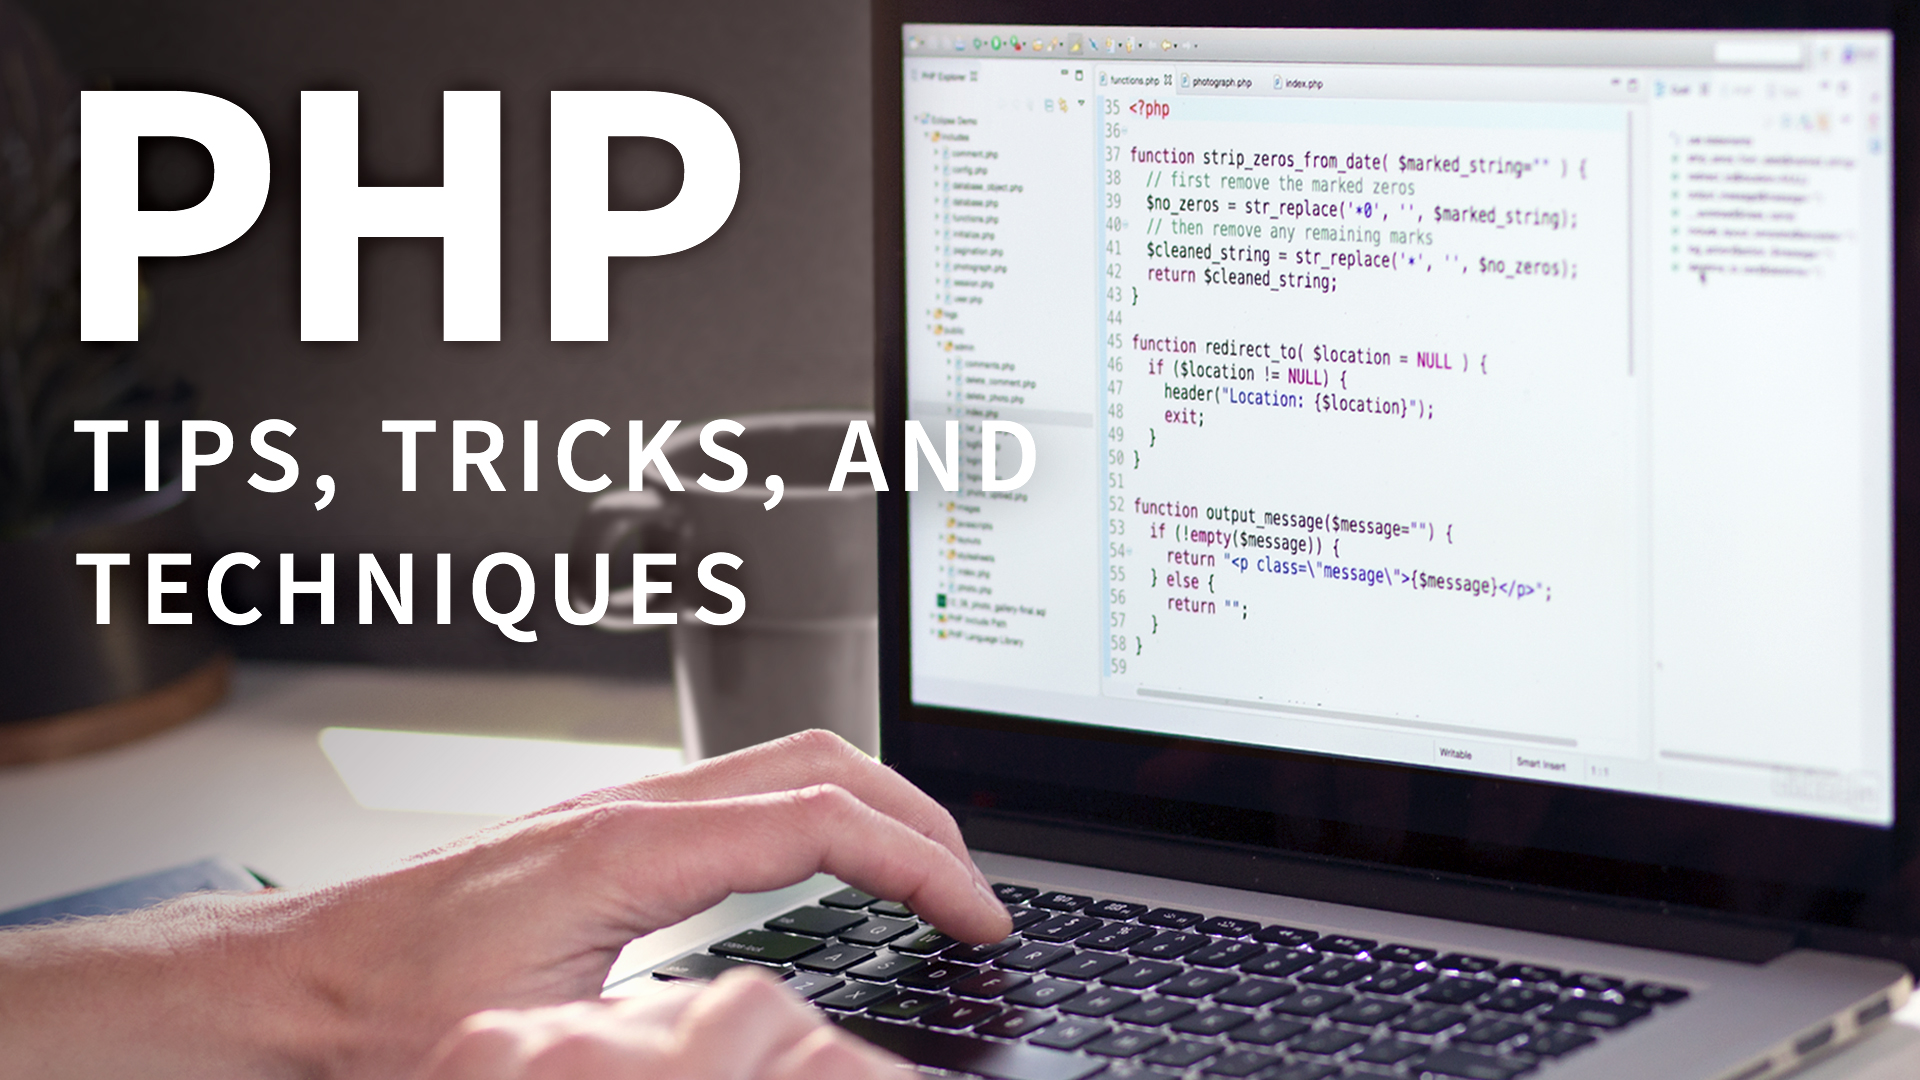 Php Tips Tricks And Techniques - HD Wallpaper 